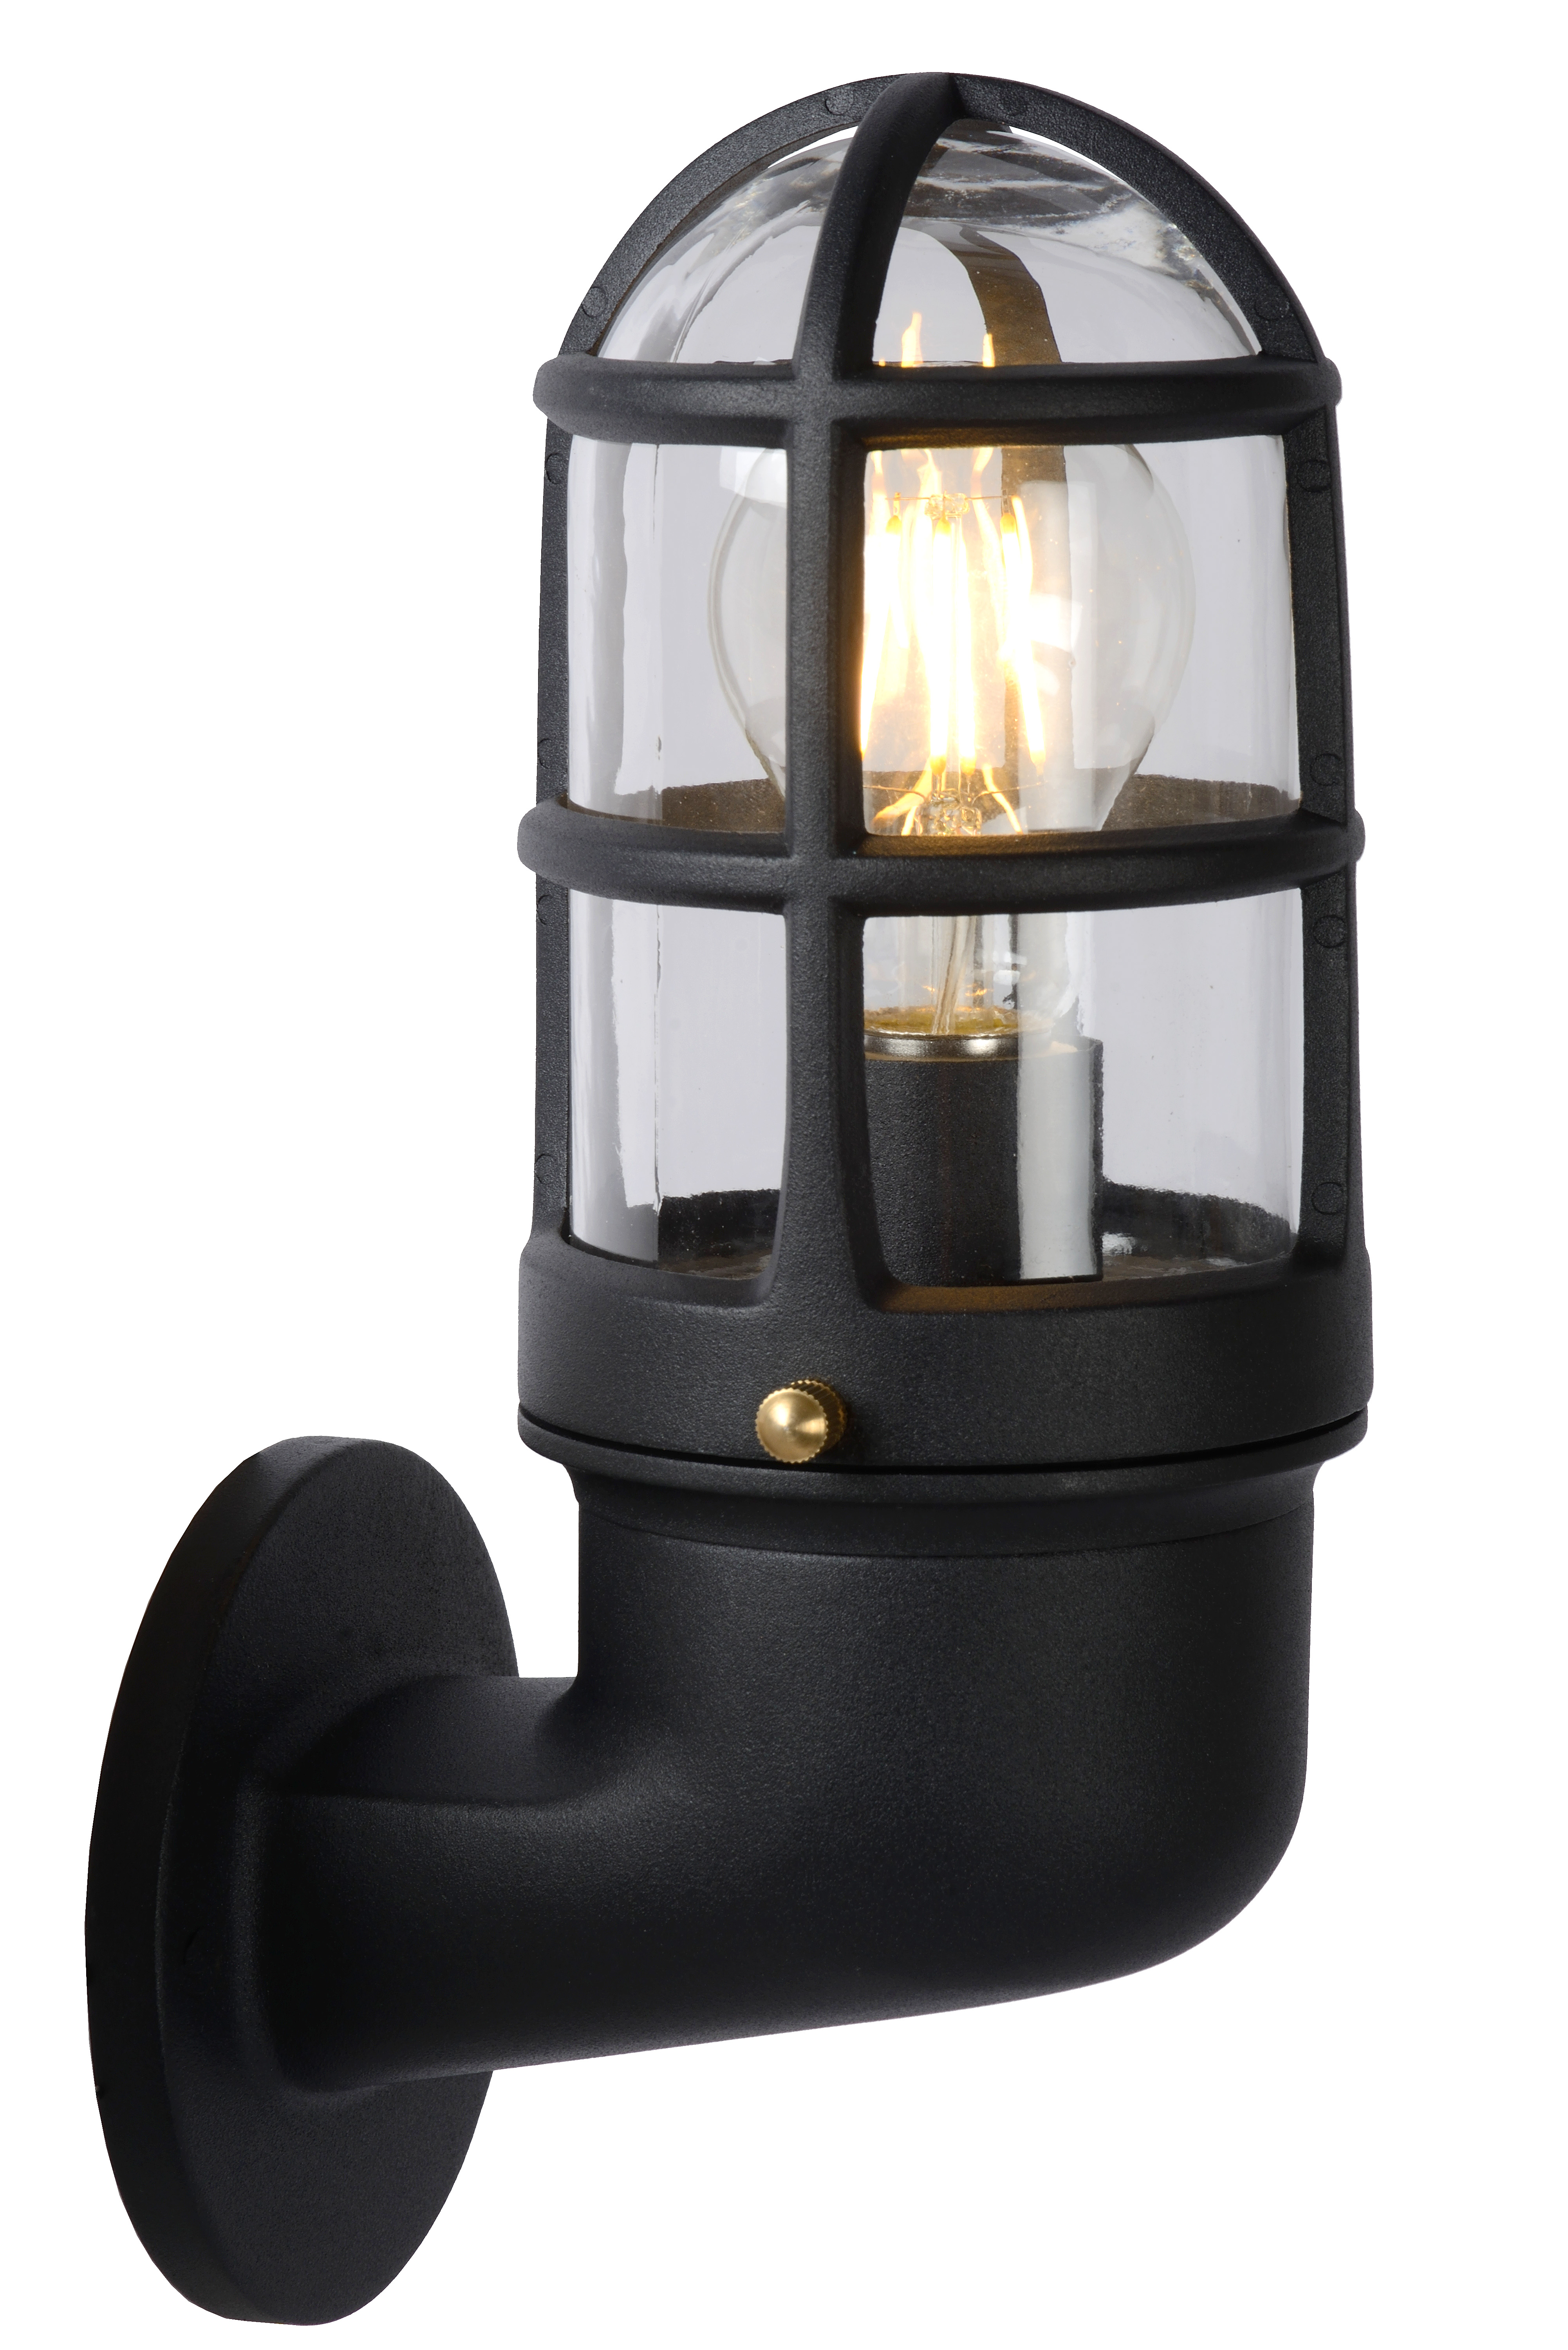 Lucide DUDLEY - Wall light Outdoor - 1xE27 - IP44 - Black